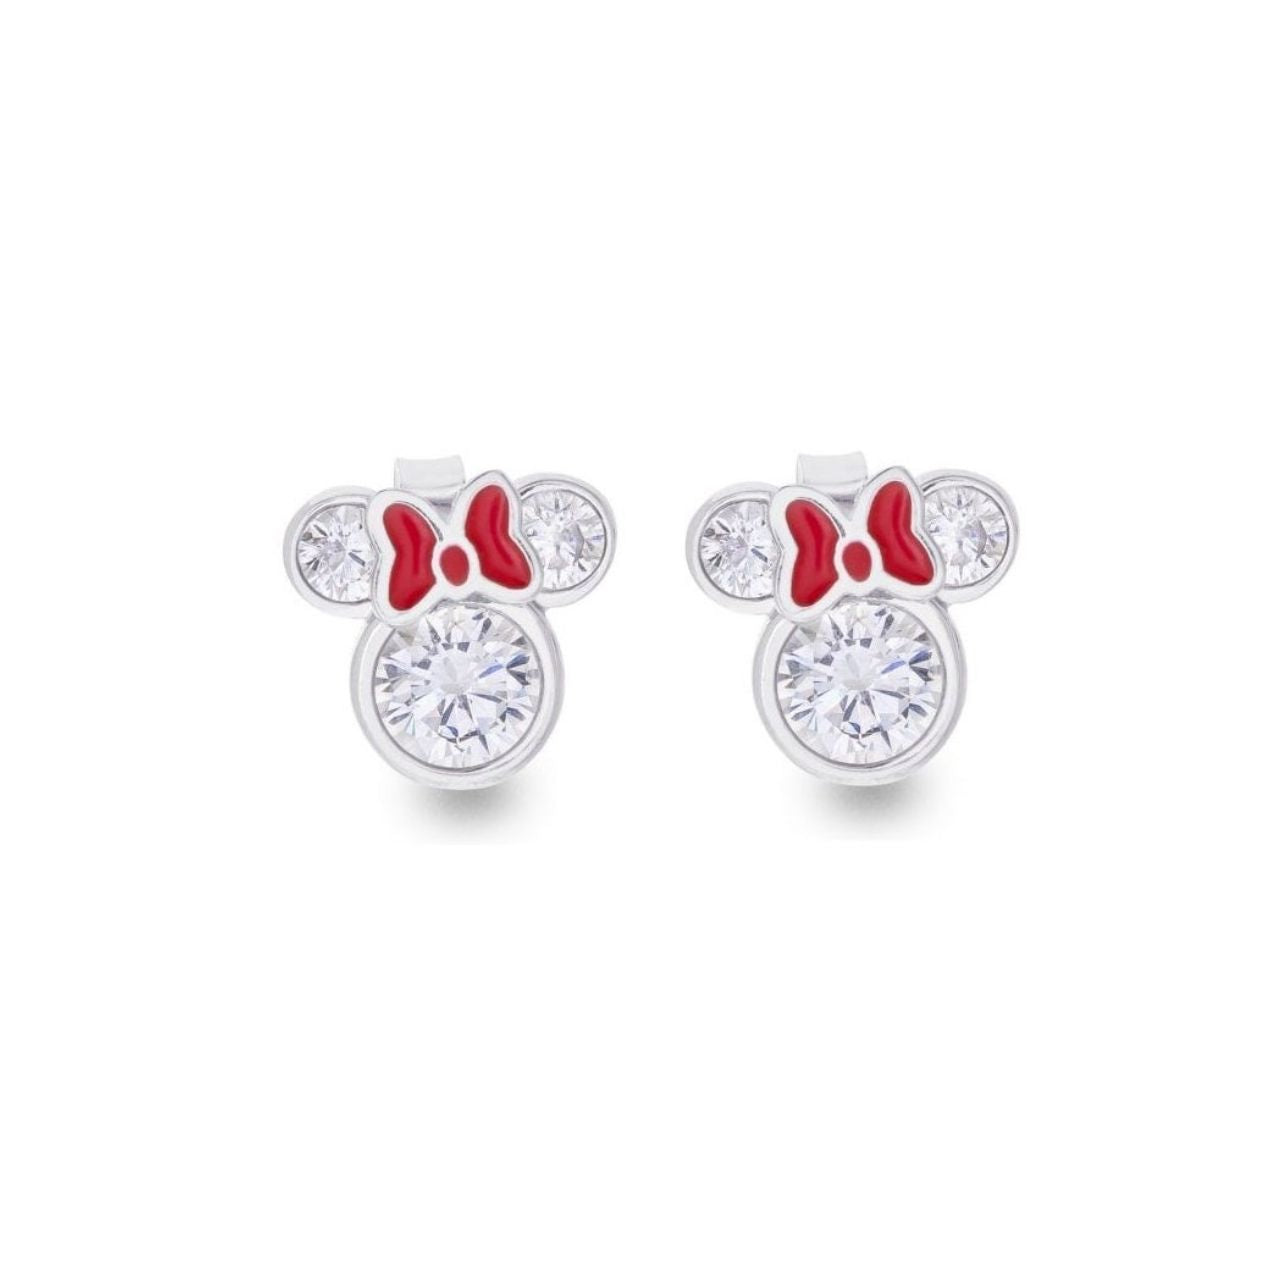 Peers Hardy Disney Minnie Mouse Sterling Silver CZ Crystals With Red Bow Stud Earrings  Very pretty and charming Minnie Mouse shaped earrings with Cubic Zirconia stones that gives them a diamond like sparkle for a classy and sophisticated look with a beautiful bright red bow.  Trendy and fashionable design, the Disney Minnie Mouse Cz Crystal Silver Stud Earrings add a chic, fun touch to any outfit.